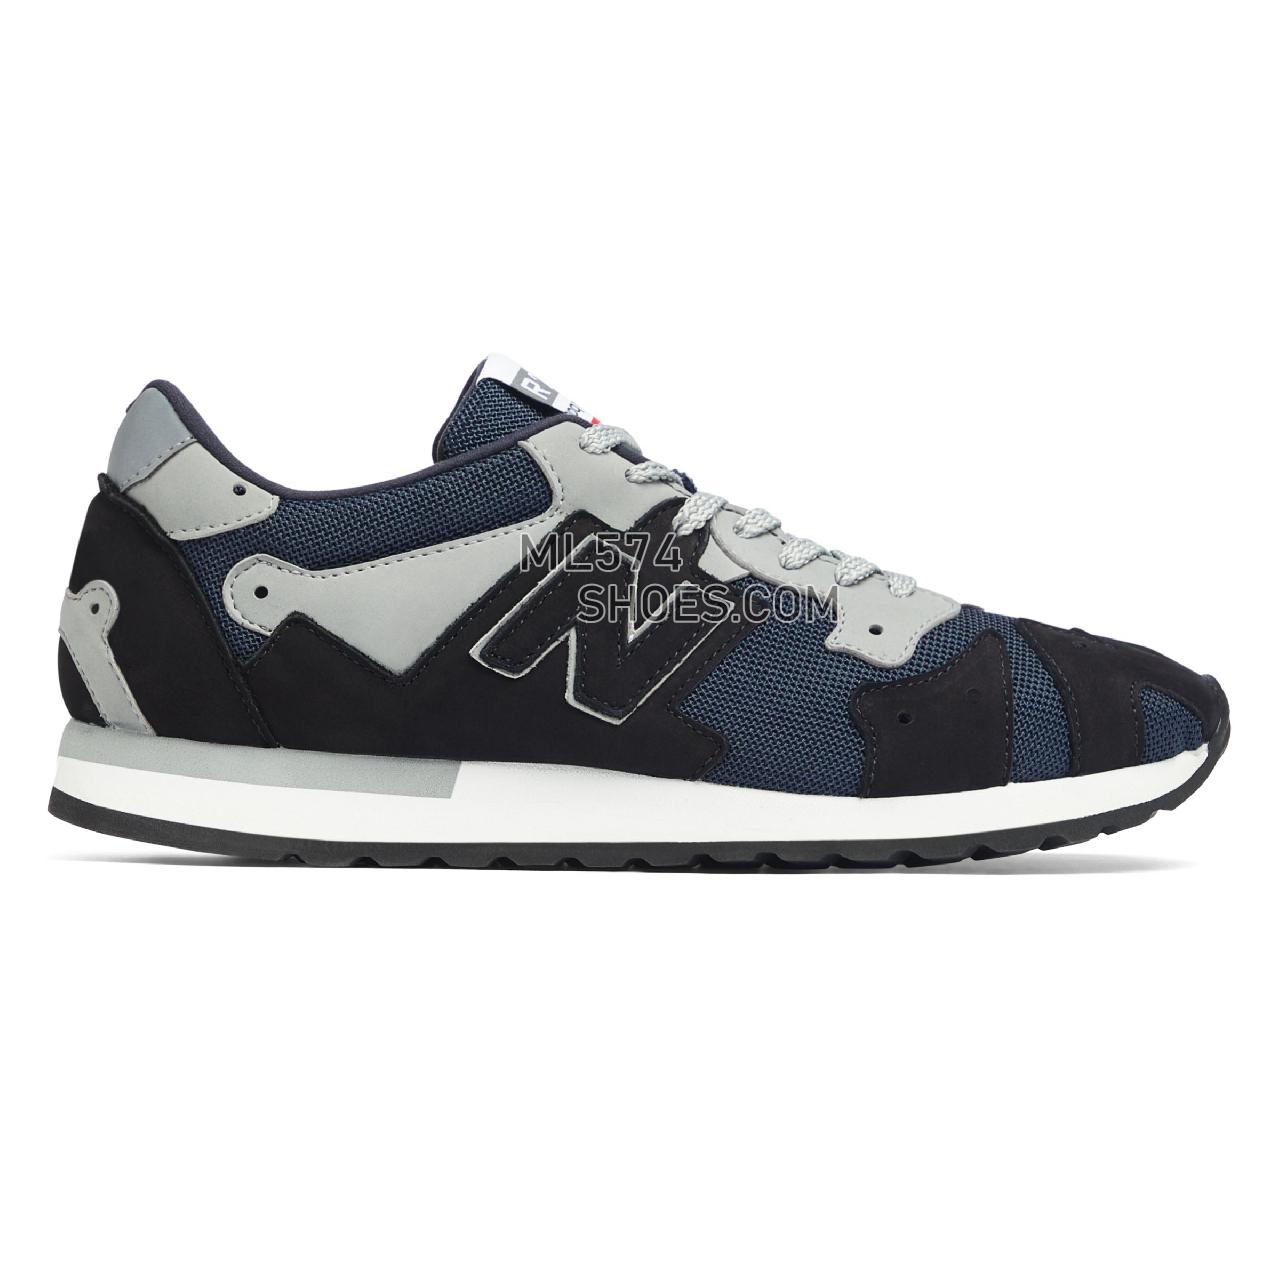 New Balance MADE in UK R770 - Unisex Men's Women's Made in USA And UK Sneakers - Navy with Grey and White - R770NNG